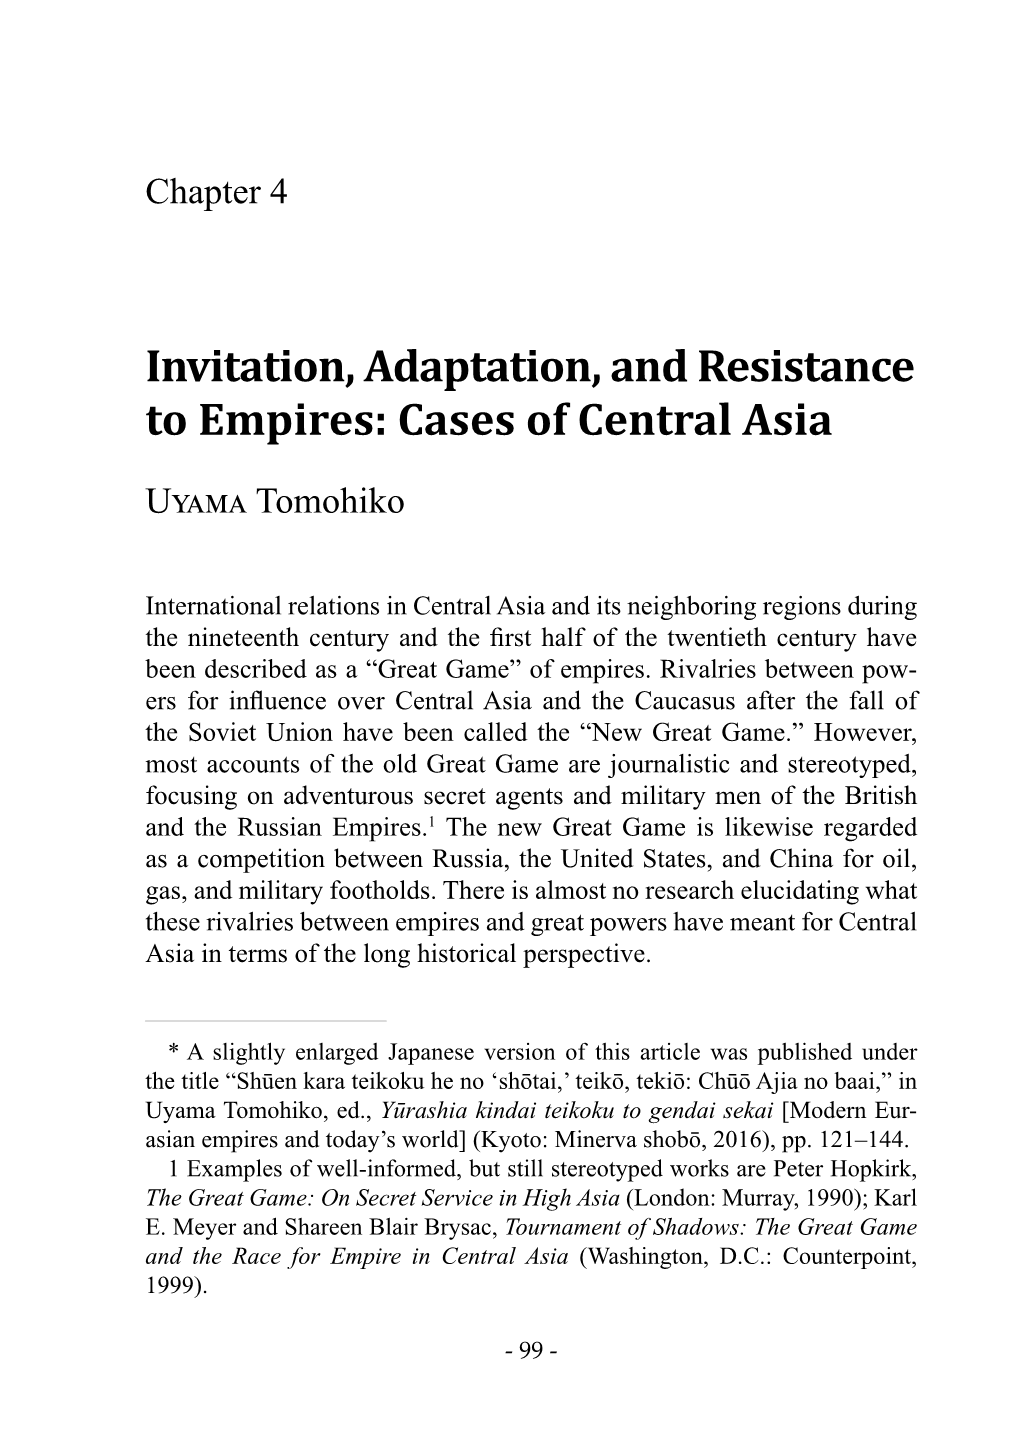 Invitation, Adaptation, and Resistance to Empires: Cases of Central Asia